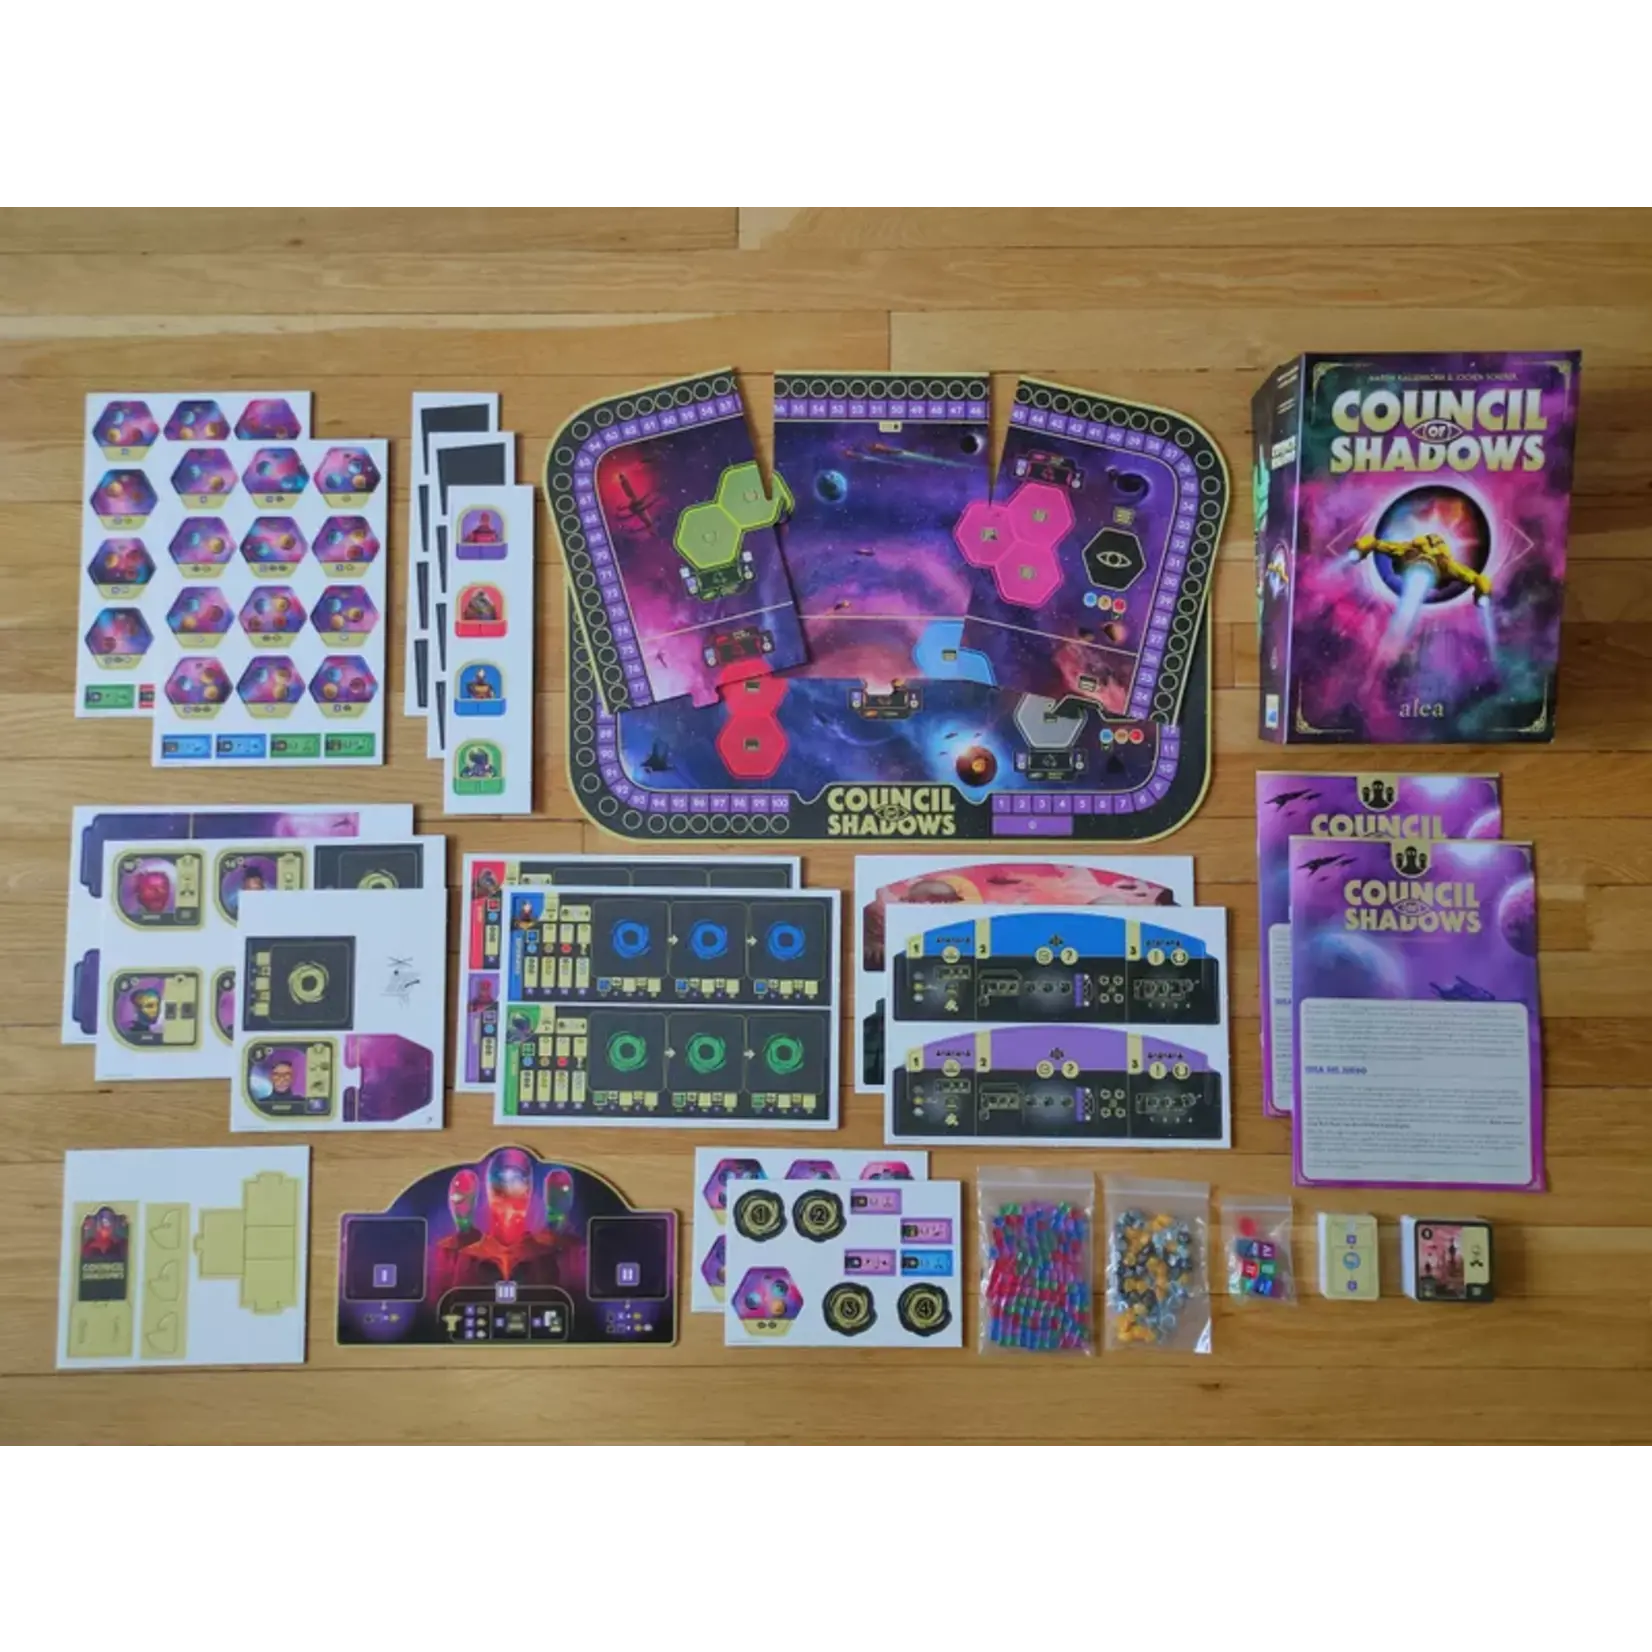 The Council of Shadows Game